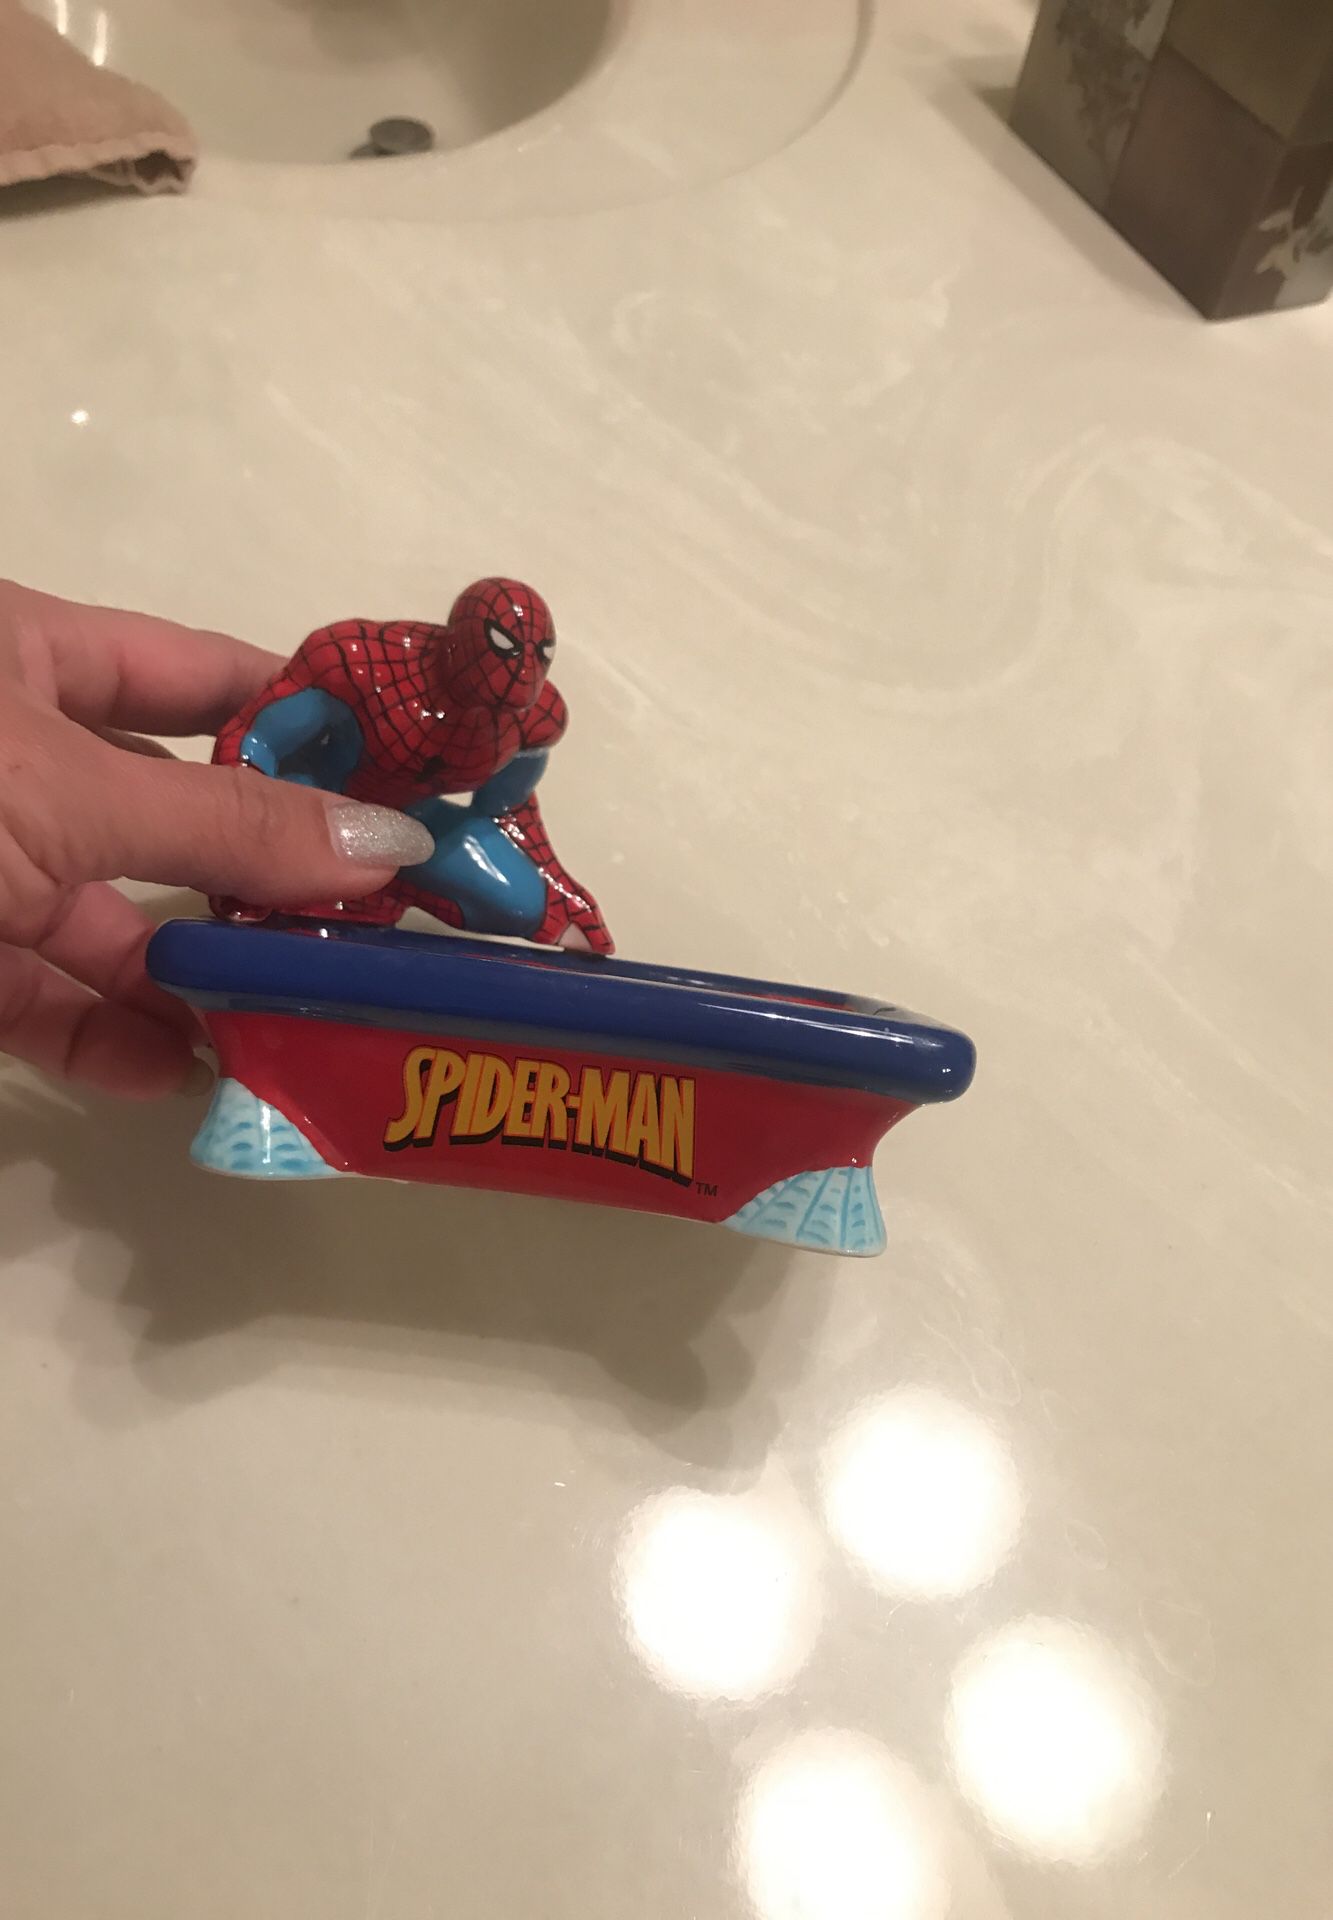 Marvel Spider-Man Soap Bar Tray Red Collectible